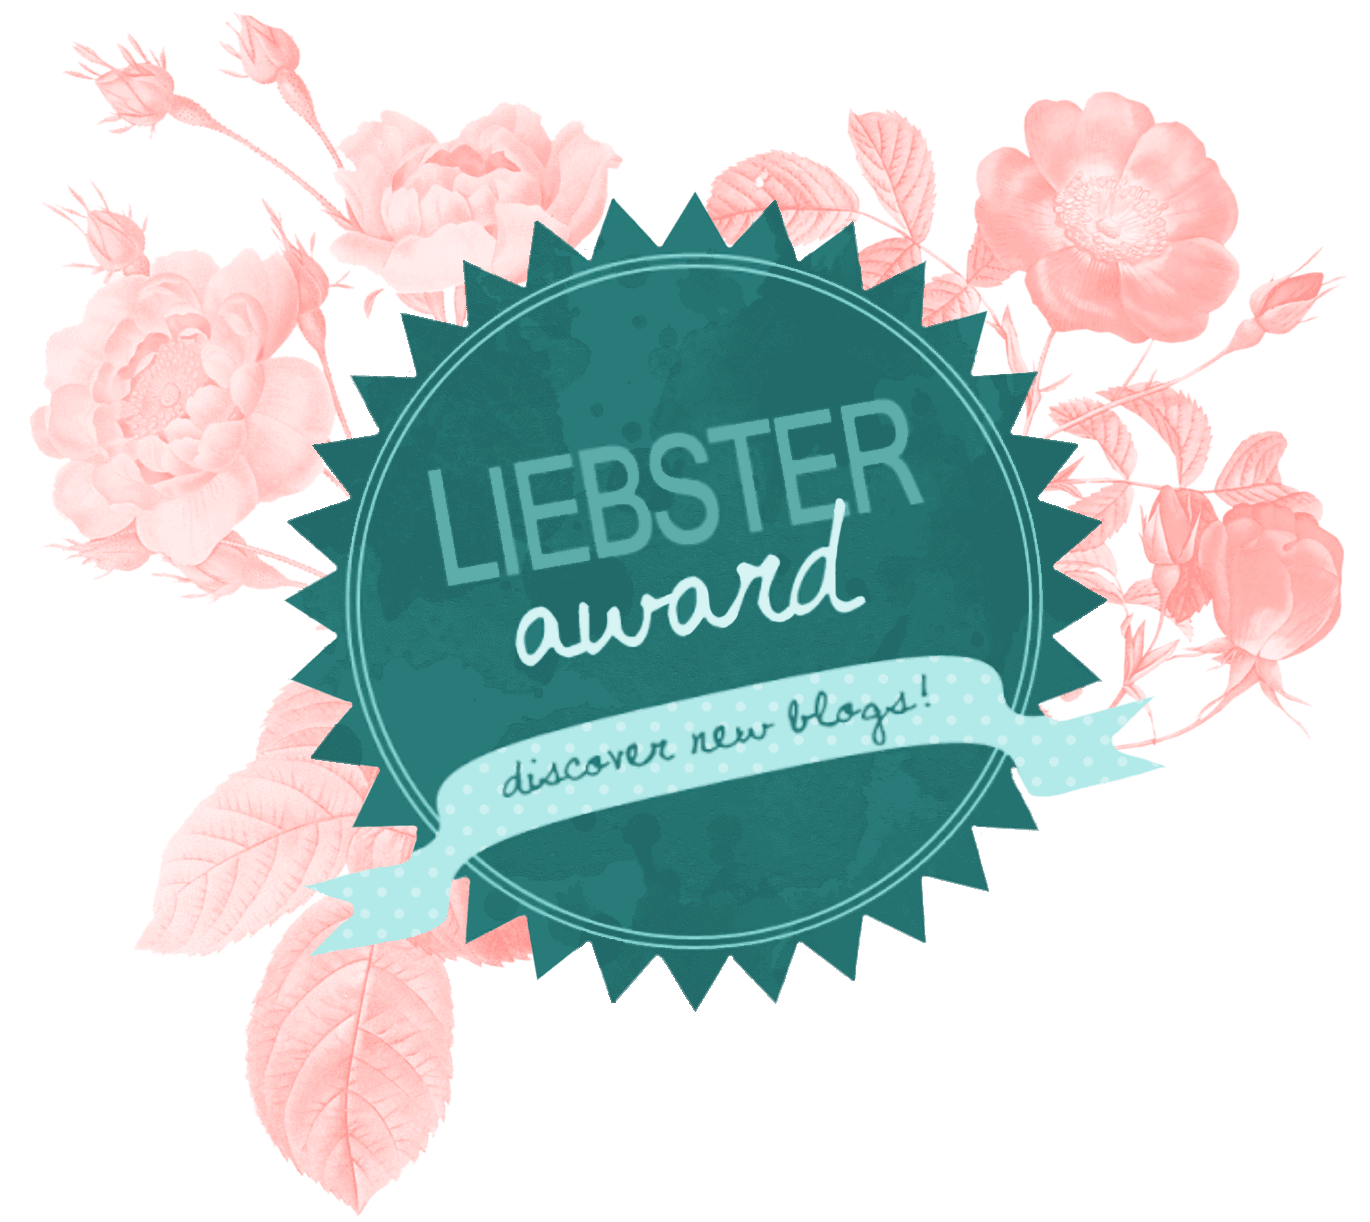 The Liebster Award and Pay it Forward. The Liebster Award is a virtual award passed from blogger to blogger to show support while promoting other bloggers we enjoy.. #liebsteraward #posts #love #life #tags